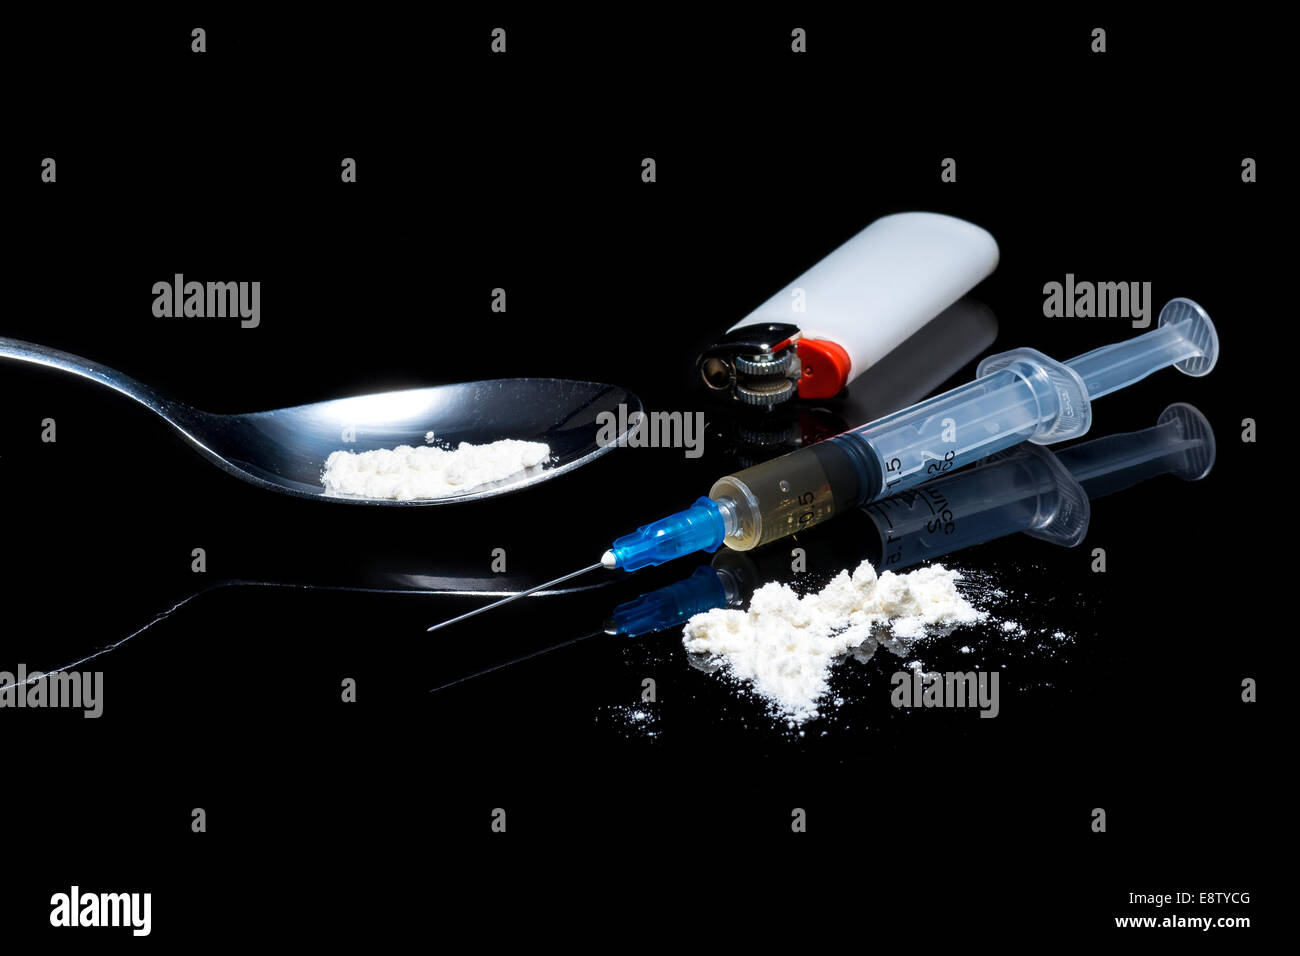 Drug syringe and cooked heroin on spoon on the black background Stock Photo